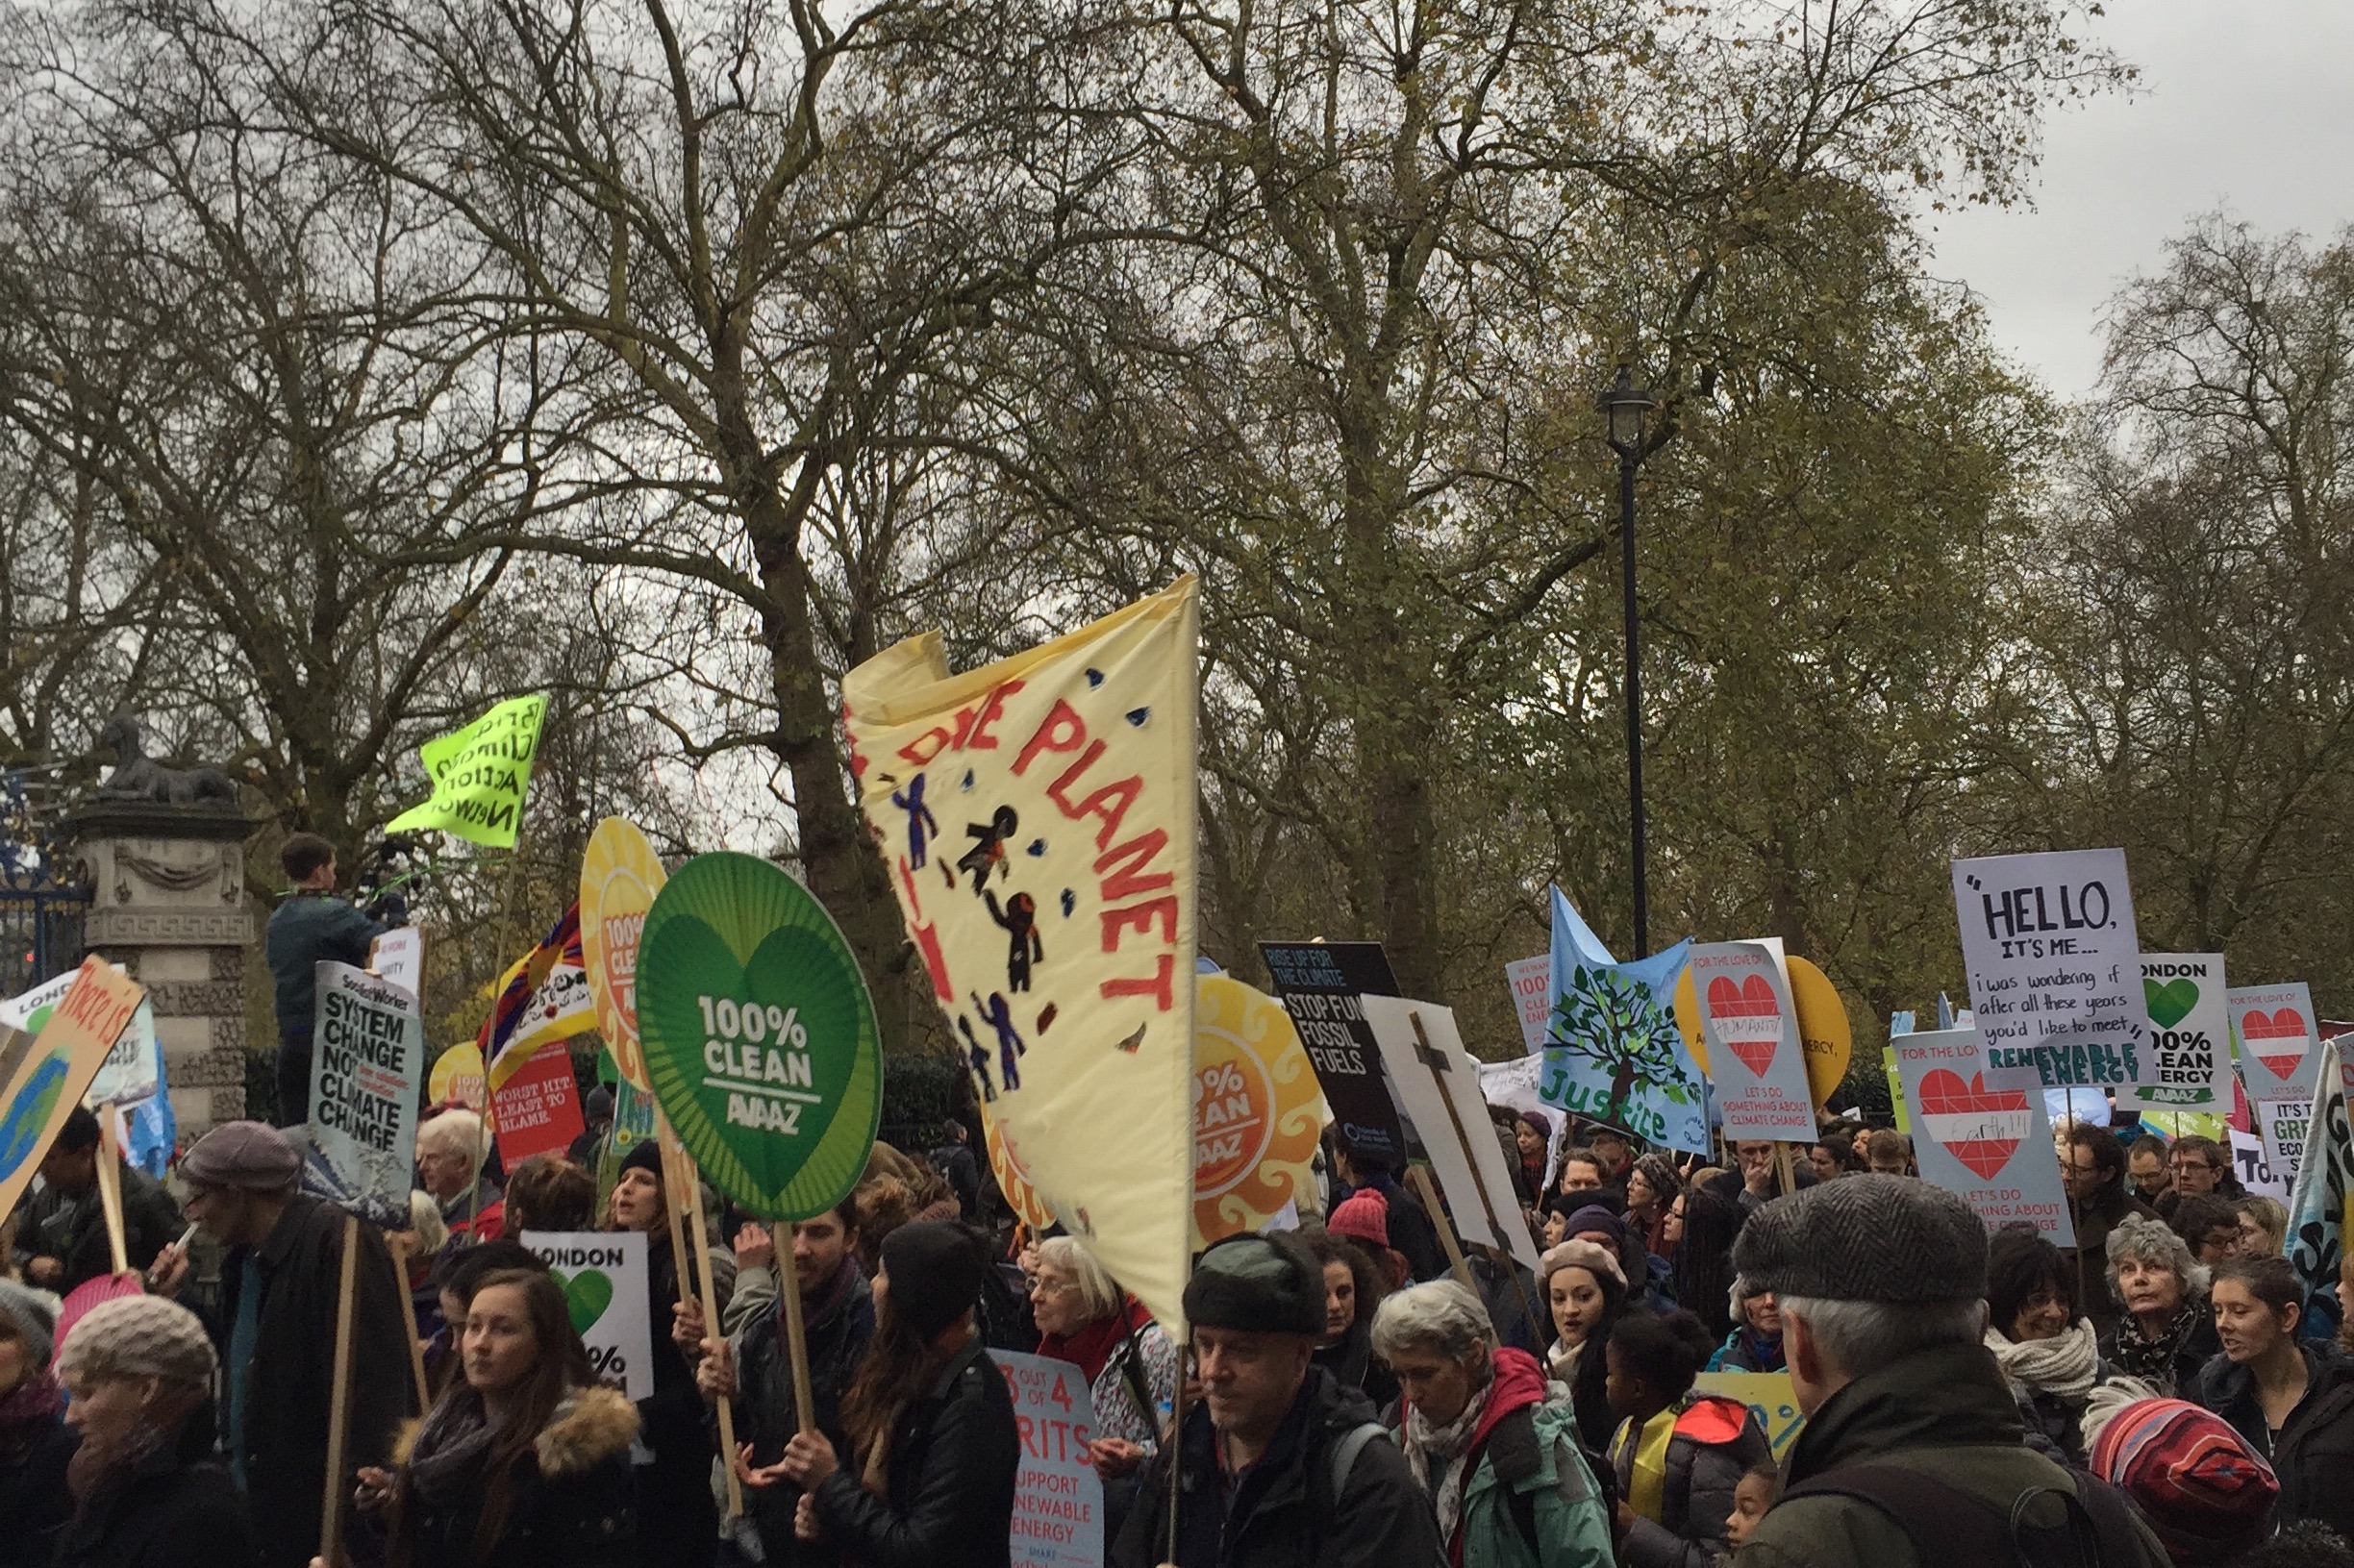 50,000 people attend climate march in London